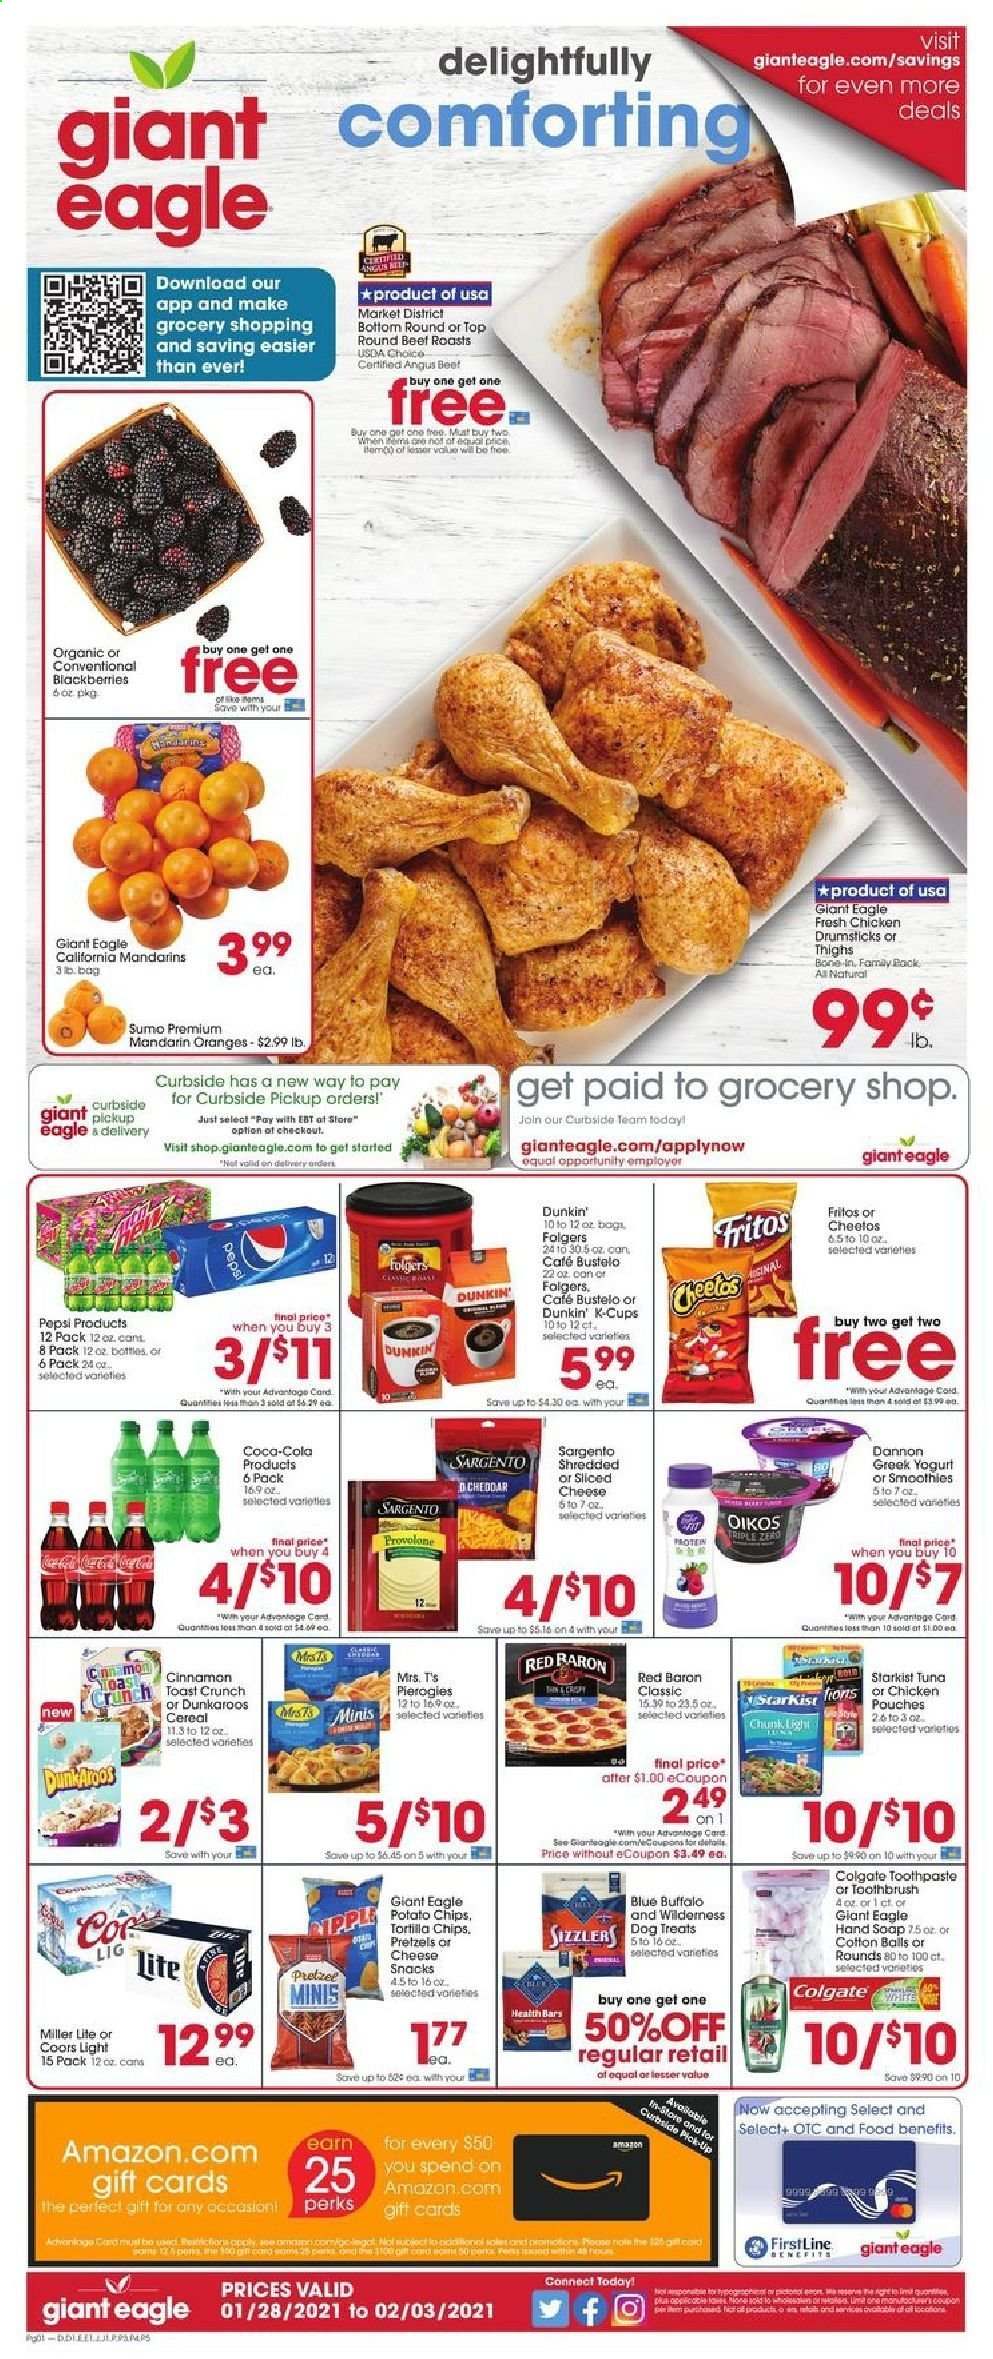 thumbnail - Giant Eagle Flyer - 01/28/2021 - 02/03/2021 - Sales products - Miller Lite, Coors, blackberries, pretzels, toast bread, oranges, tuna, StarKist, sliced cheese, Sargento, greek yoghurt, yoghurt, Oikos, Dannon, Red Baron, tortilla chips, potato chips, Cheetos, chips, snack, mandarines, cereals, Fritos, cinnamon, Pepsi, Folgers, coffee capsules, K-Cups, beer, chicken drumsticks, beef meat, hand soap, soap, Colgate, toothbrush, toothpaste, pan, Blue Buffalo. Page 1.